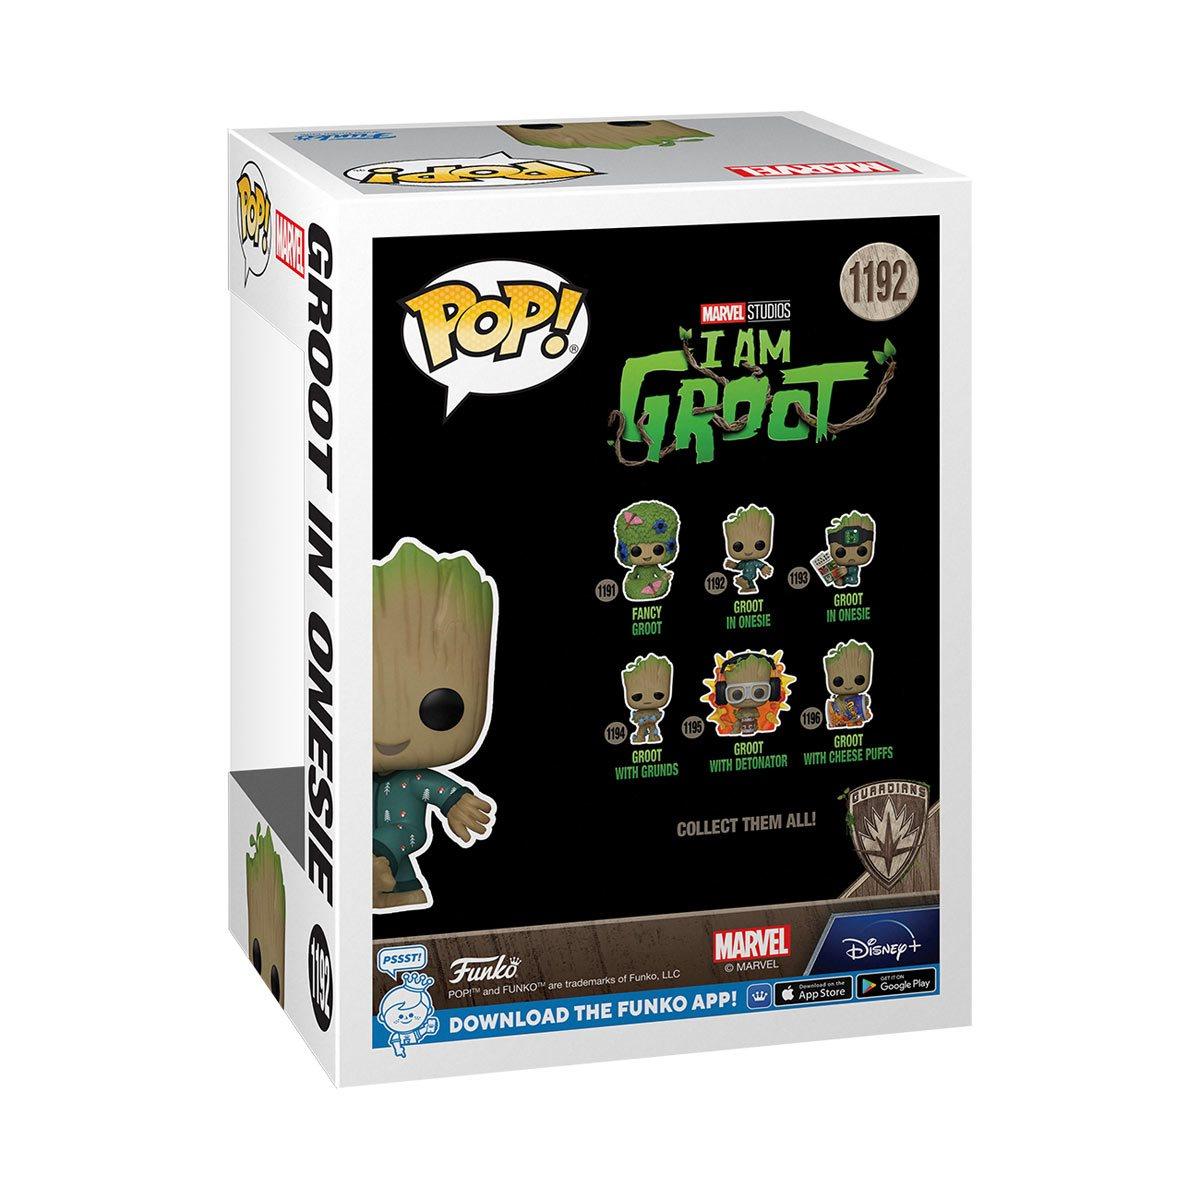 Funko Pop Marvel I Am Groot - Groot In Onesie - BumbleToys - 18+, Action Figures, Boys, Funko, GROOT, Guardians of the Galaxy, Marvel, Pre-Order